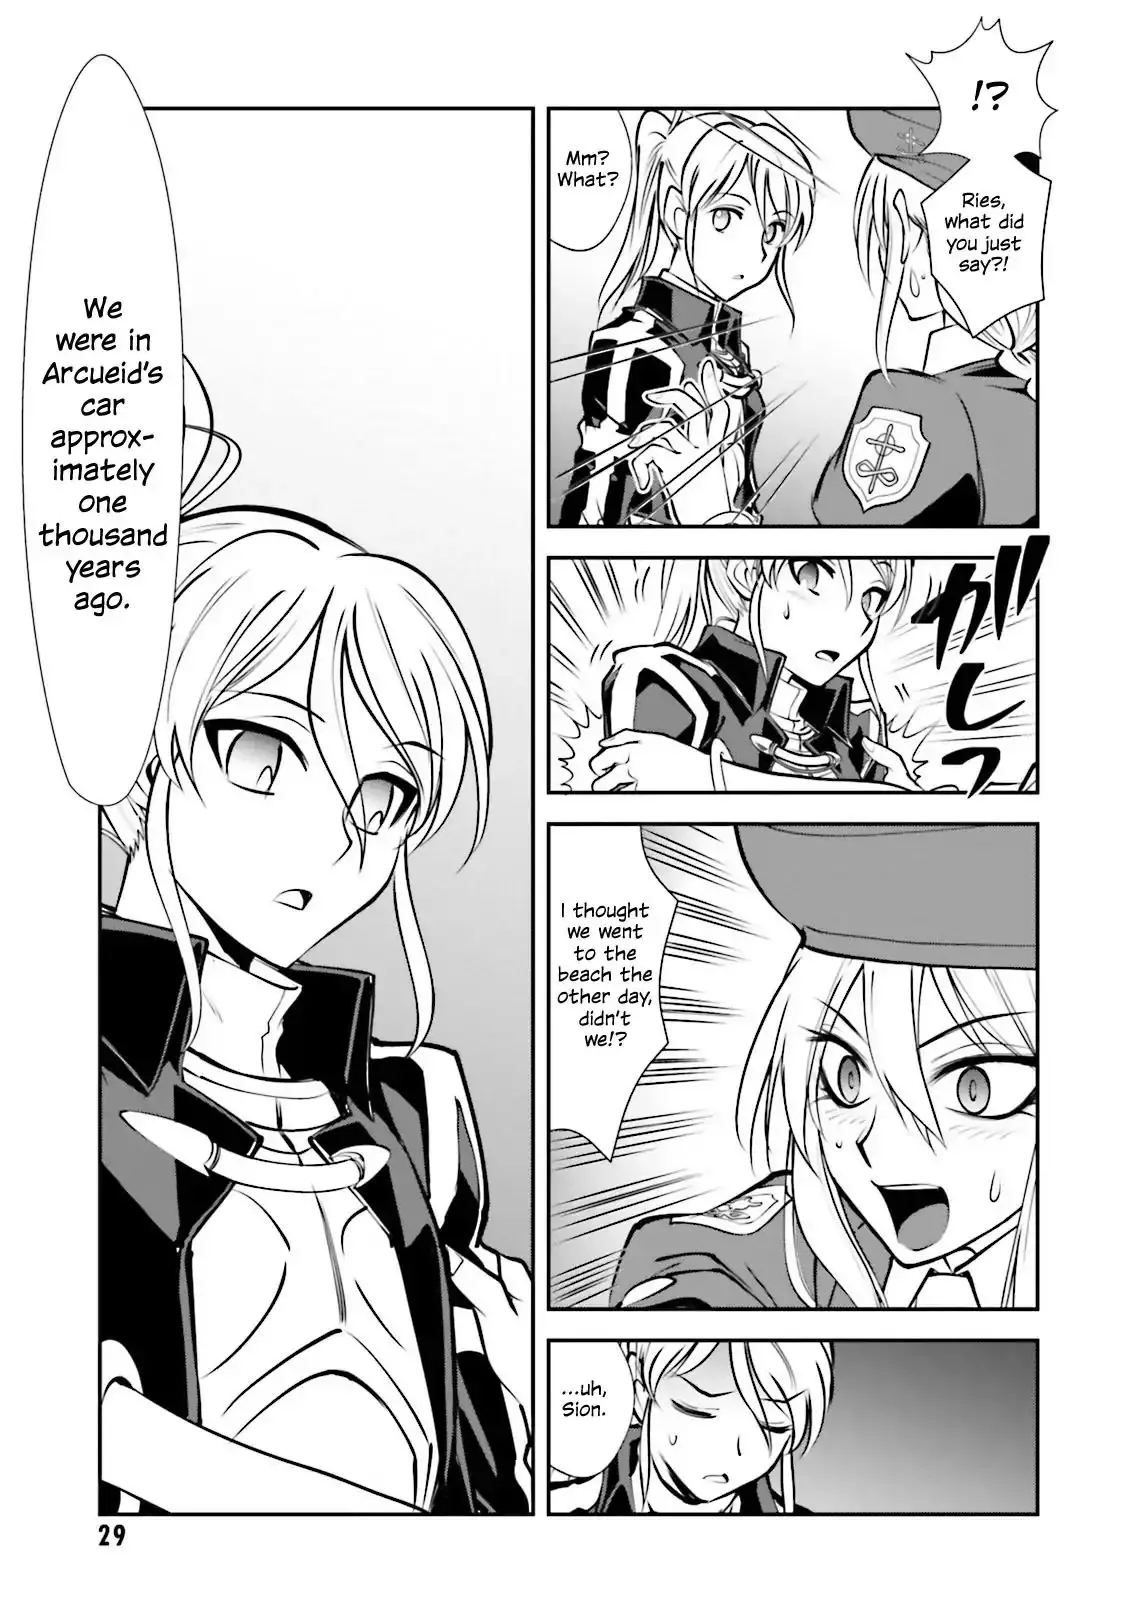 Melty Blood - Back Alley Alliance Nightmare - 6 page 28